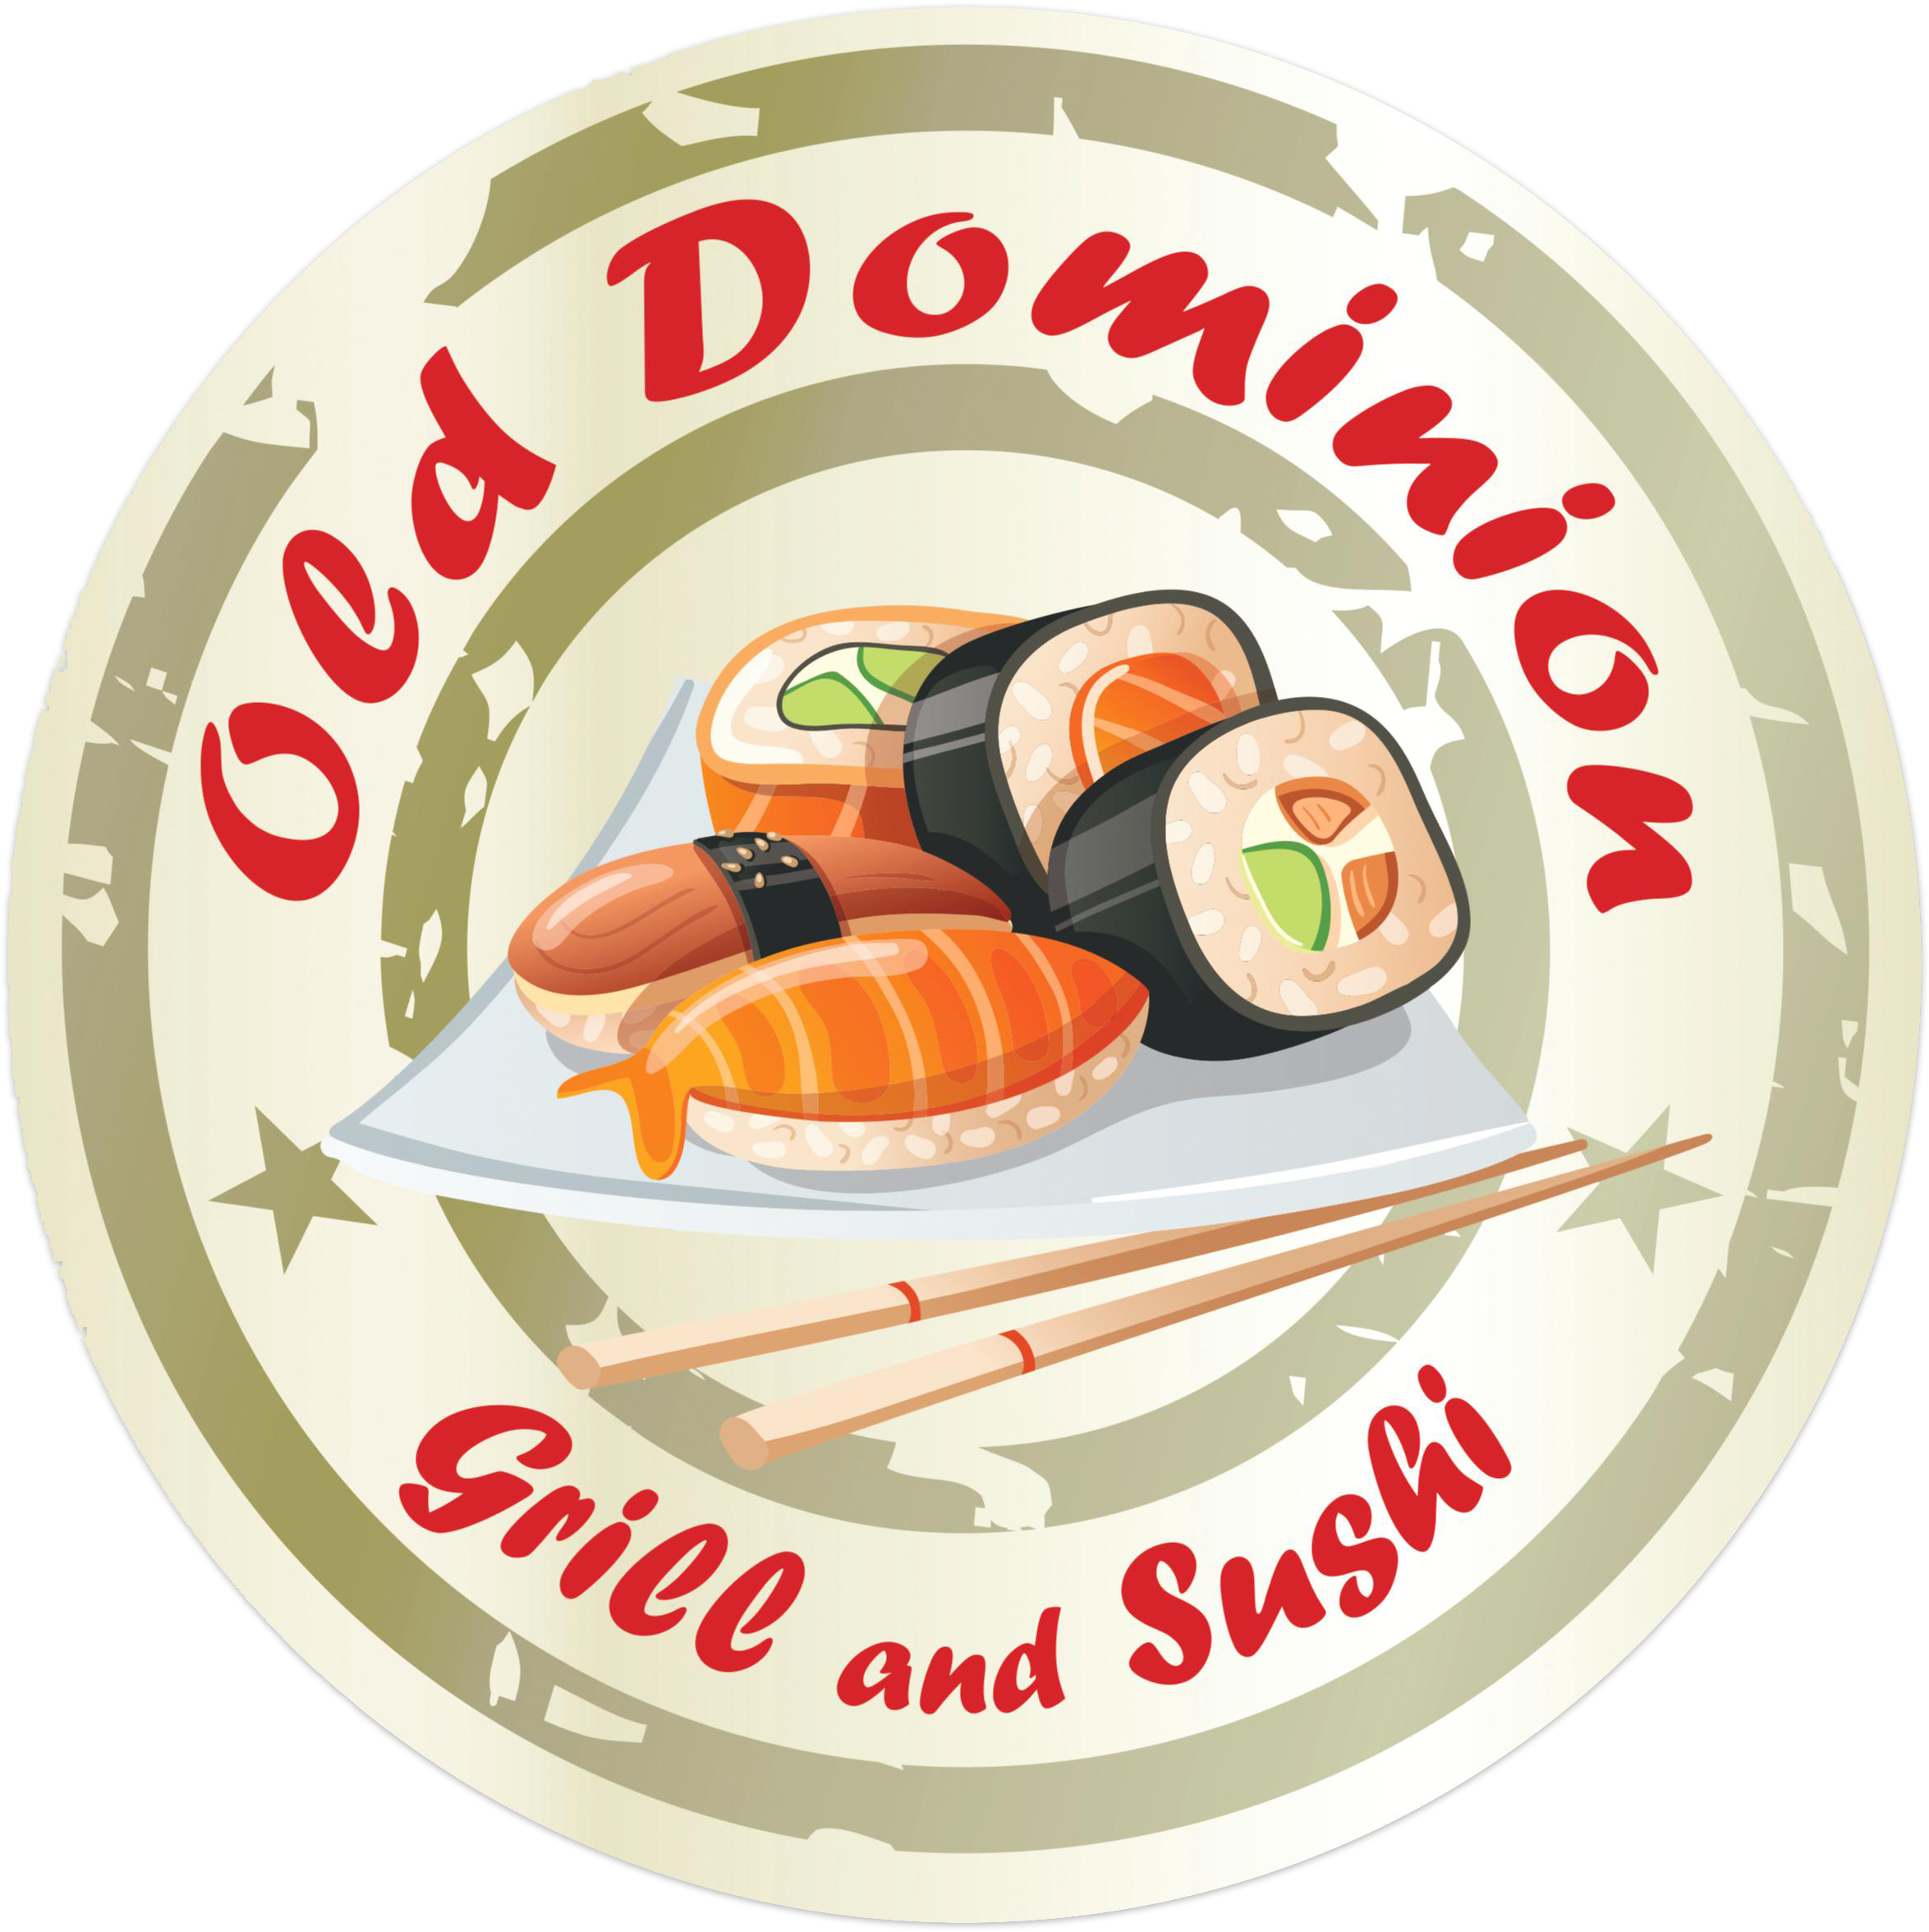 Old Dominion Grill And Sushi - Old Dominion Grill And Sushi (2380x2380)